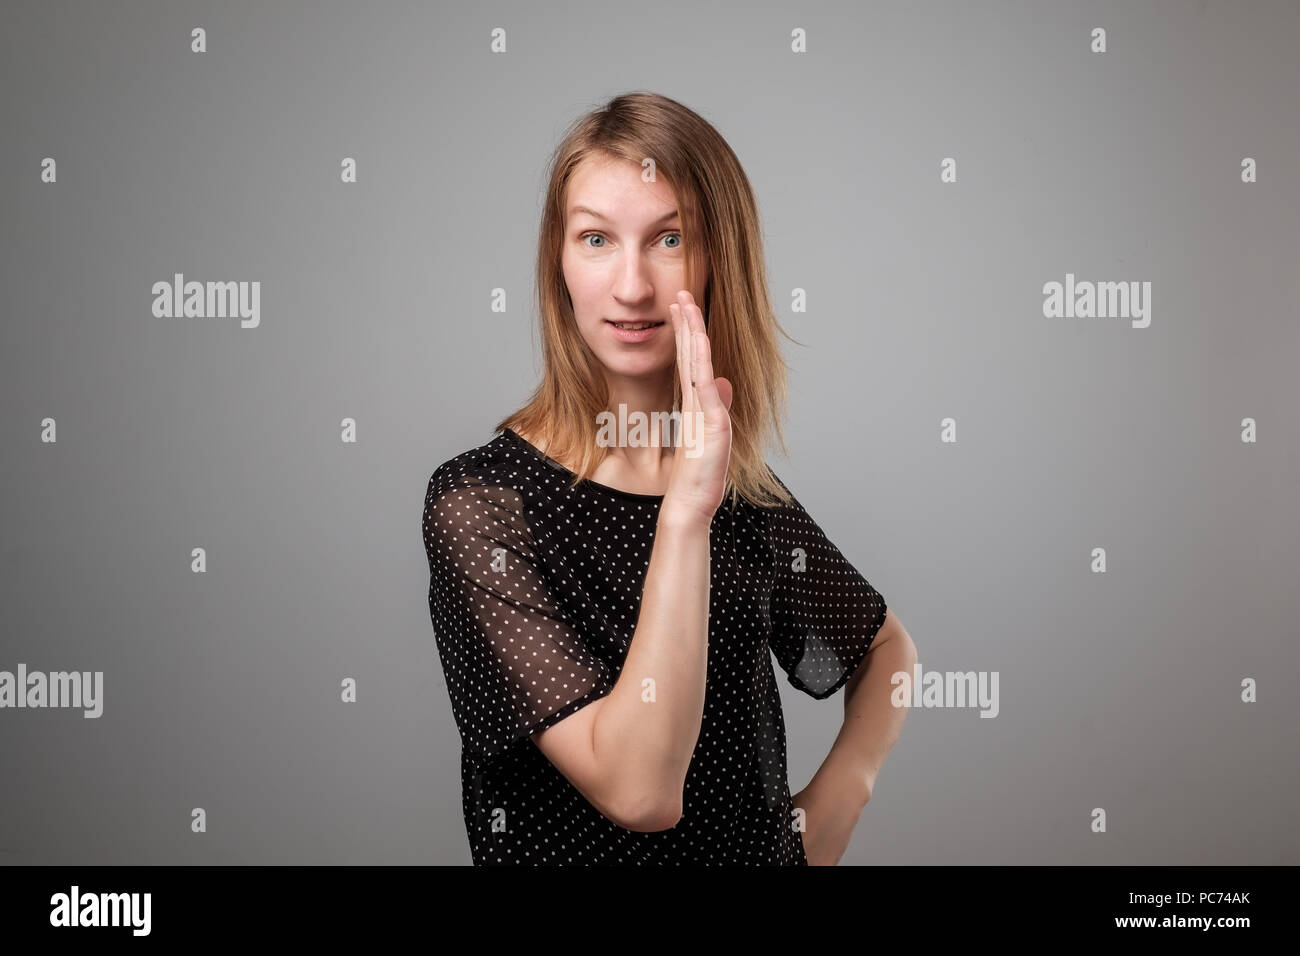 Portrait of a young pretty woman telling secret information, holding her hand near mouth Stock Photo